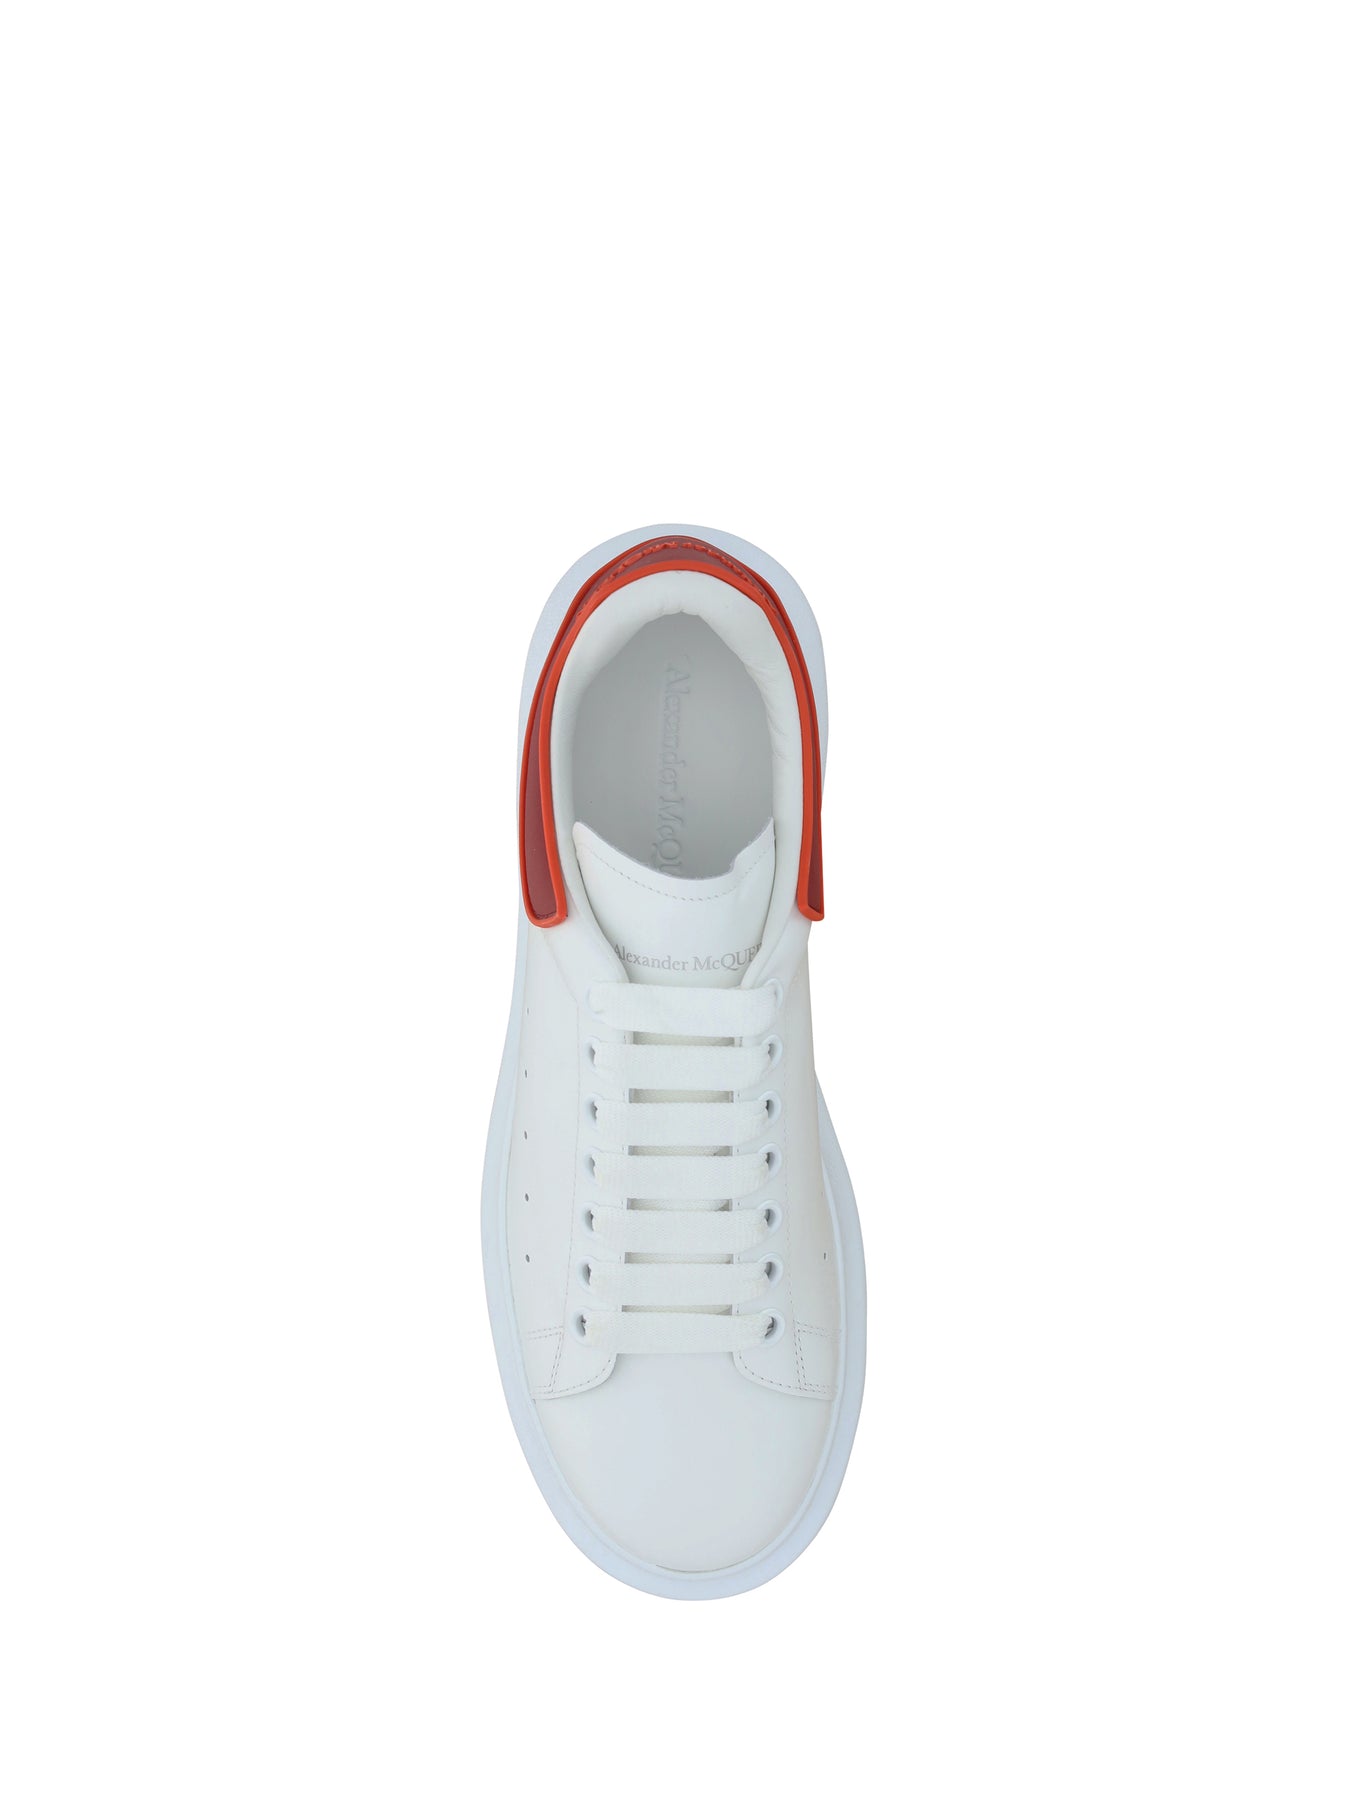 Shop Alexander Mcqueen Sneakers In White/lust Red